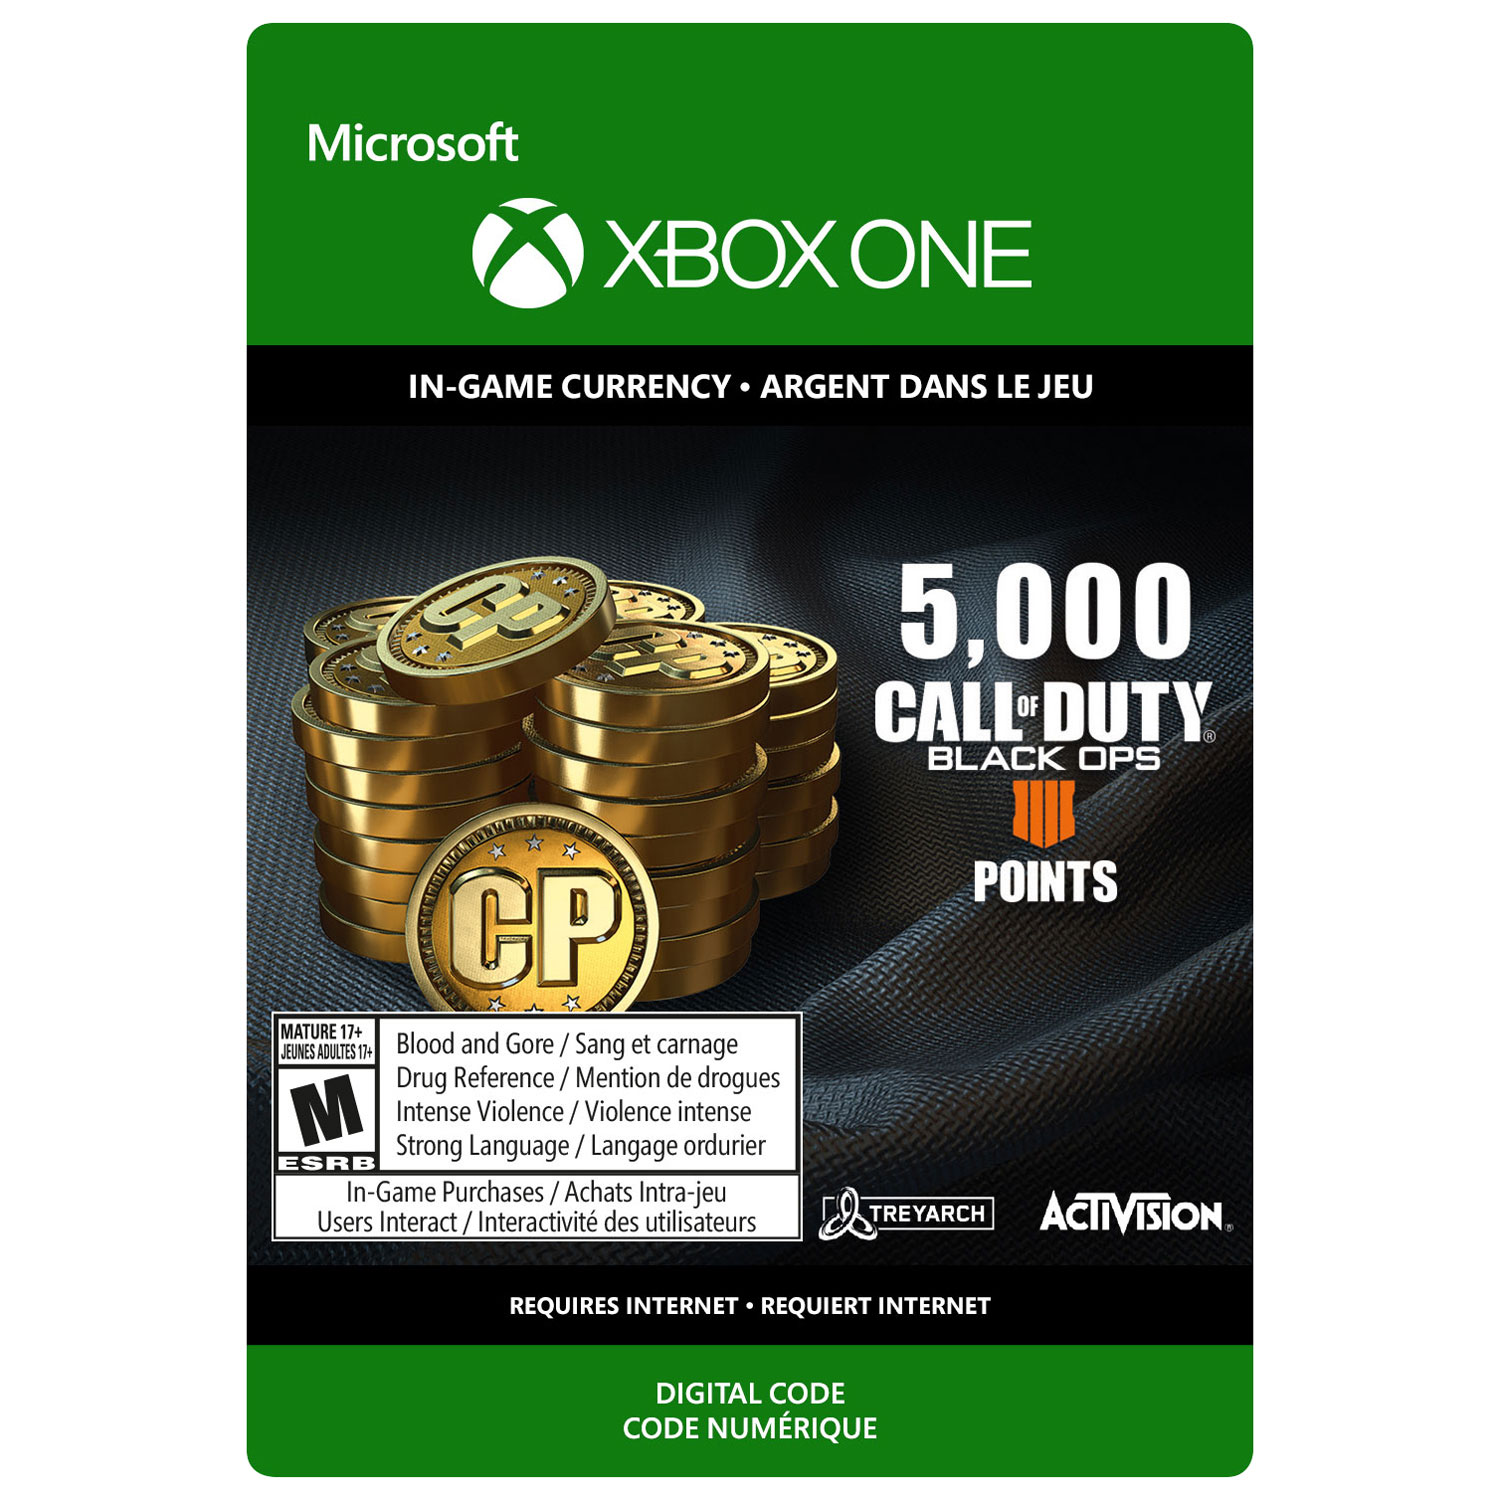 Call of Duty Black Ops 4: 5,000 COD Points (Xbox One) - Digital Download